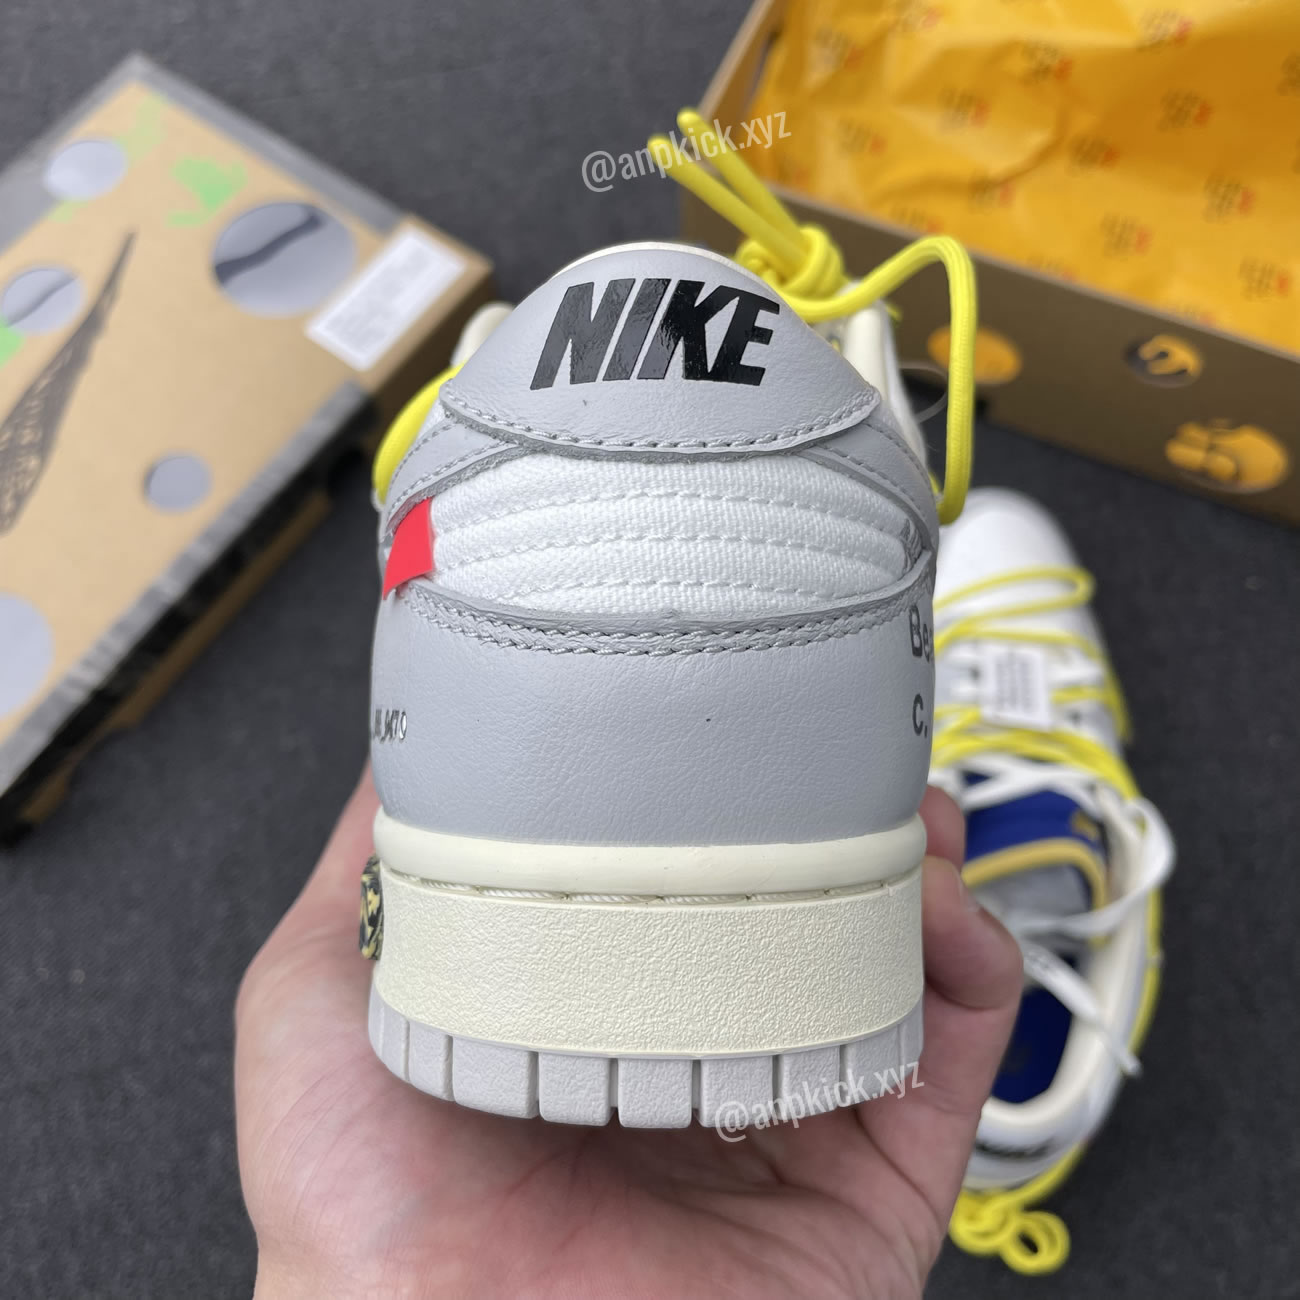 Off White Nike Sb Dunk Low The 27 Of 50 Sail Neutral Grey Dm1602 120 (7) - newkick.org